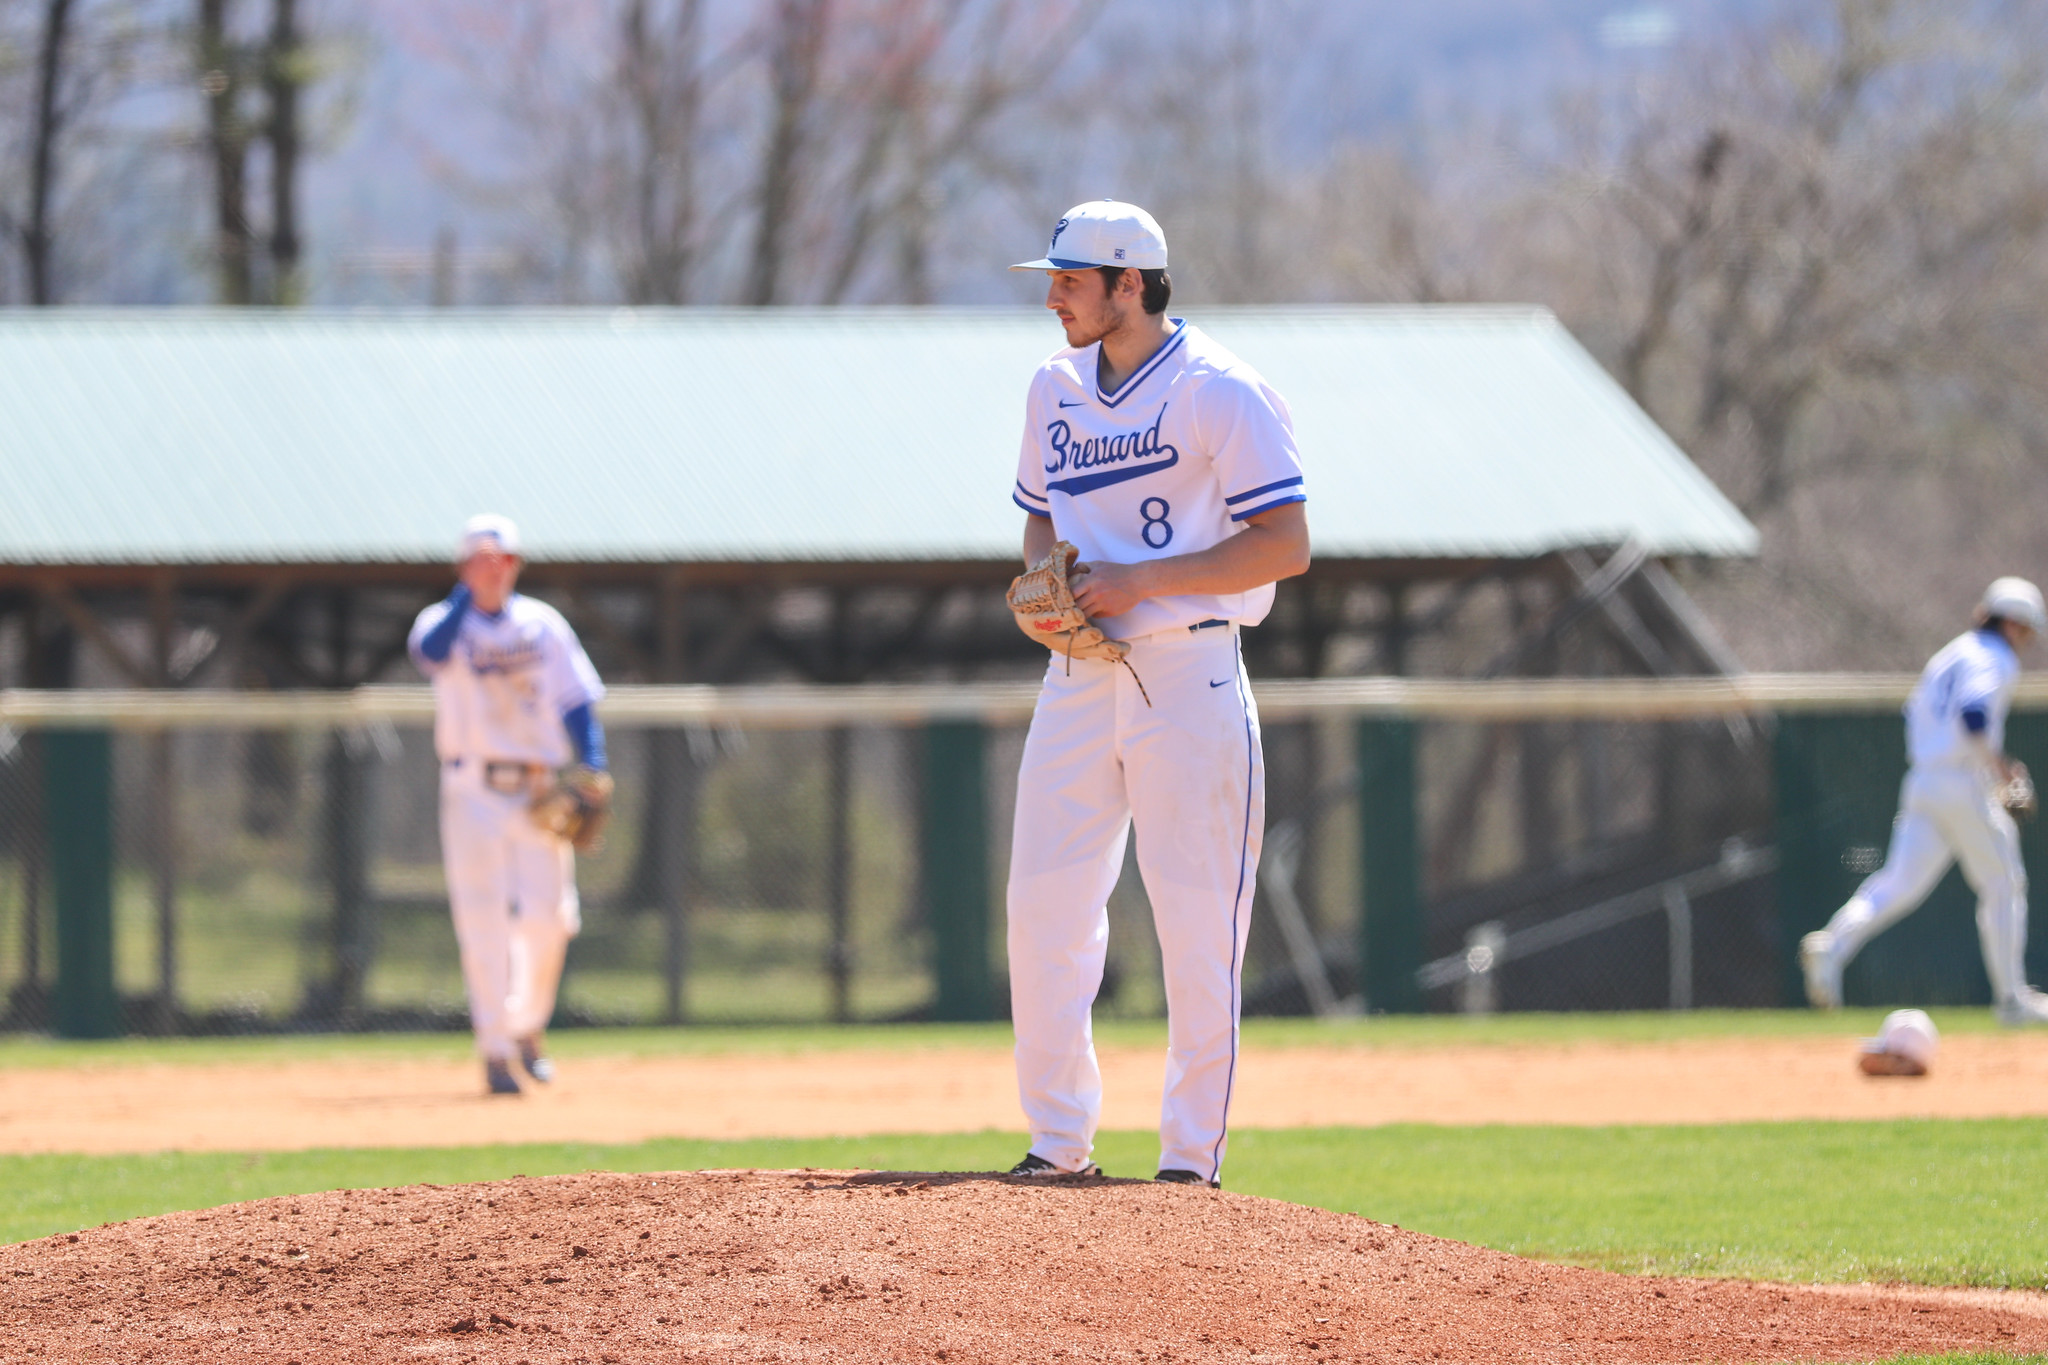 Senior left-handed pitcher Matthew Scavotto shut out Allegheny to take game one of a doubleheader sweep (Photo courtesy of Victoria Brayman '22)